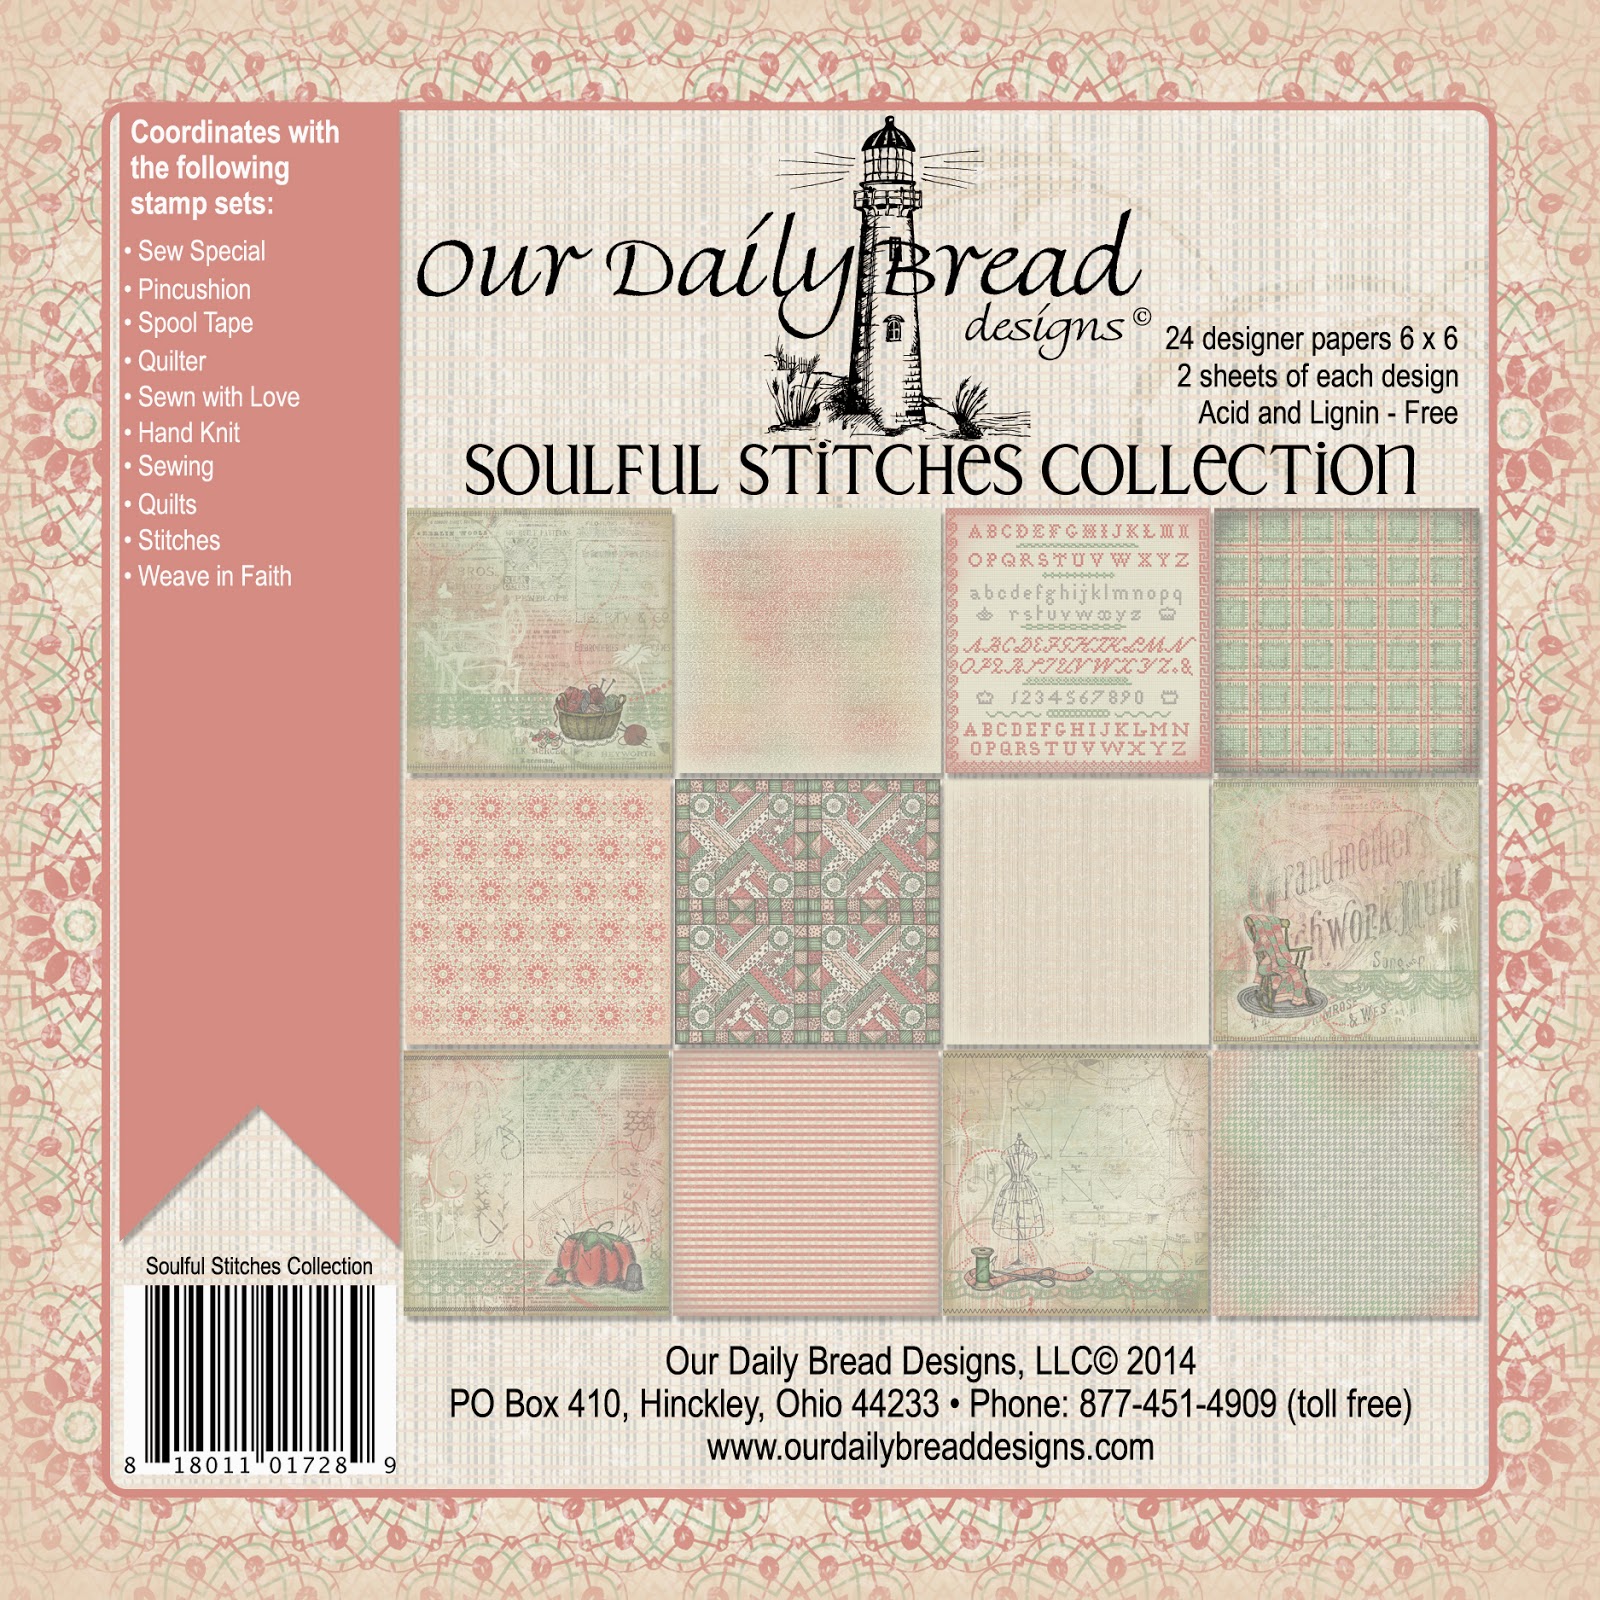 https://www.ourdailybreaddesigns.com/index.php/soulful-stitches-collection-6x6-paper-pad.html